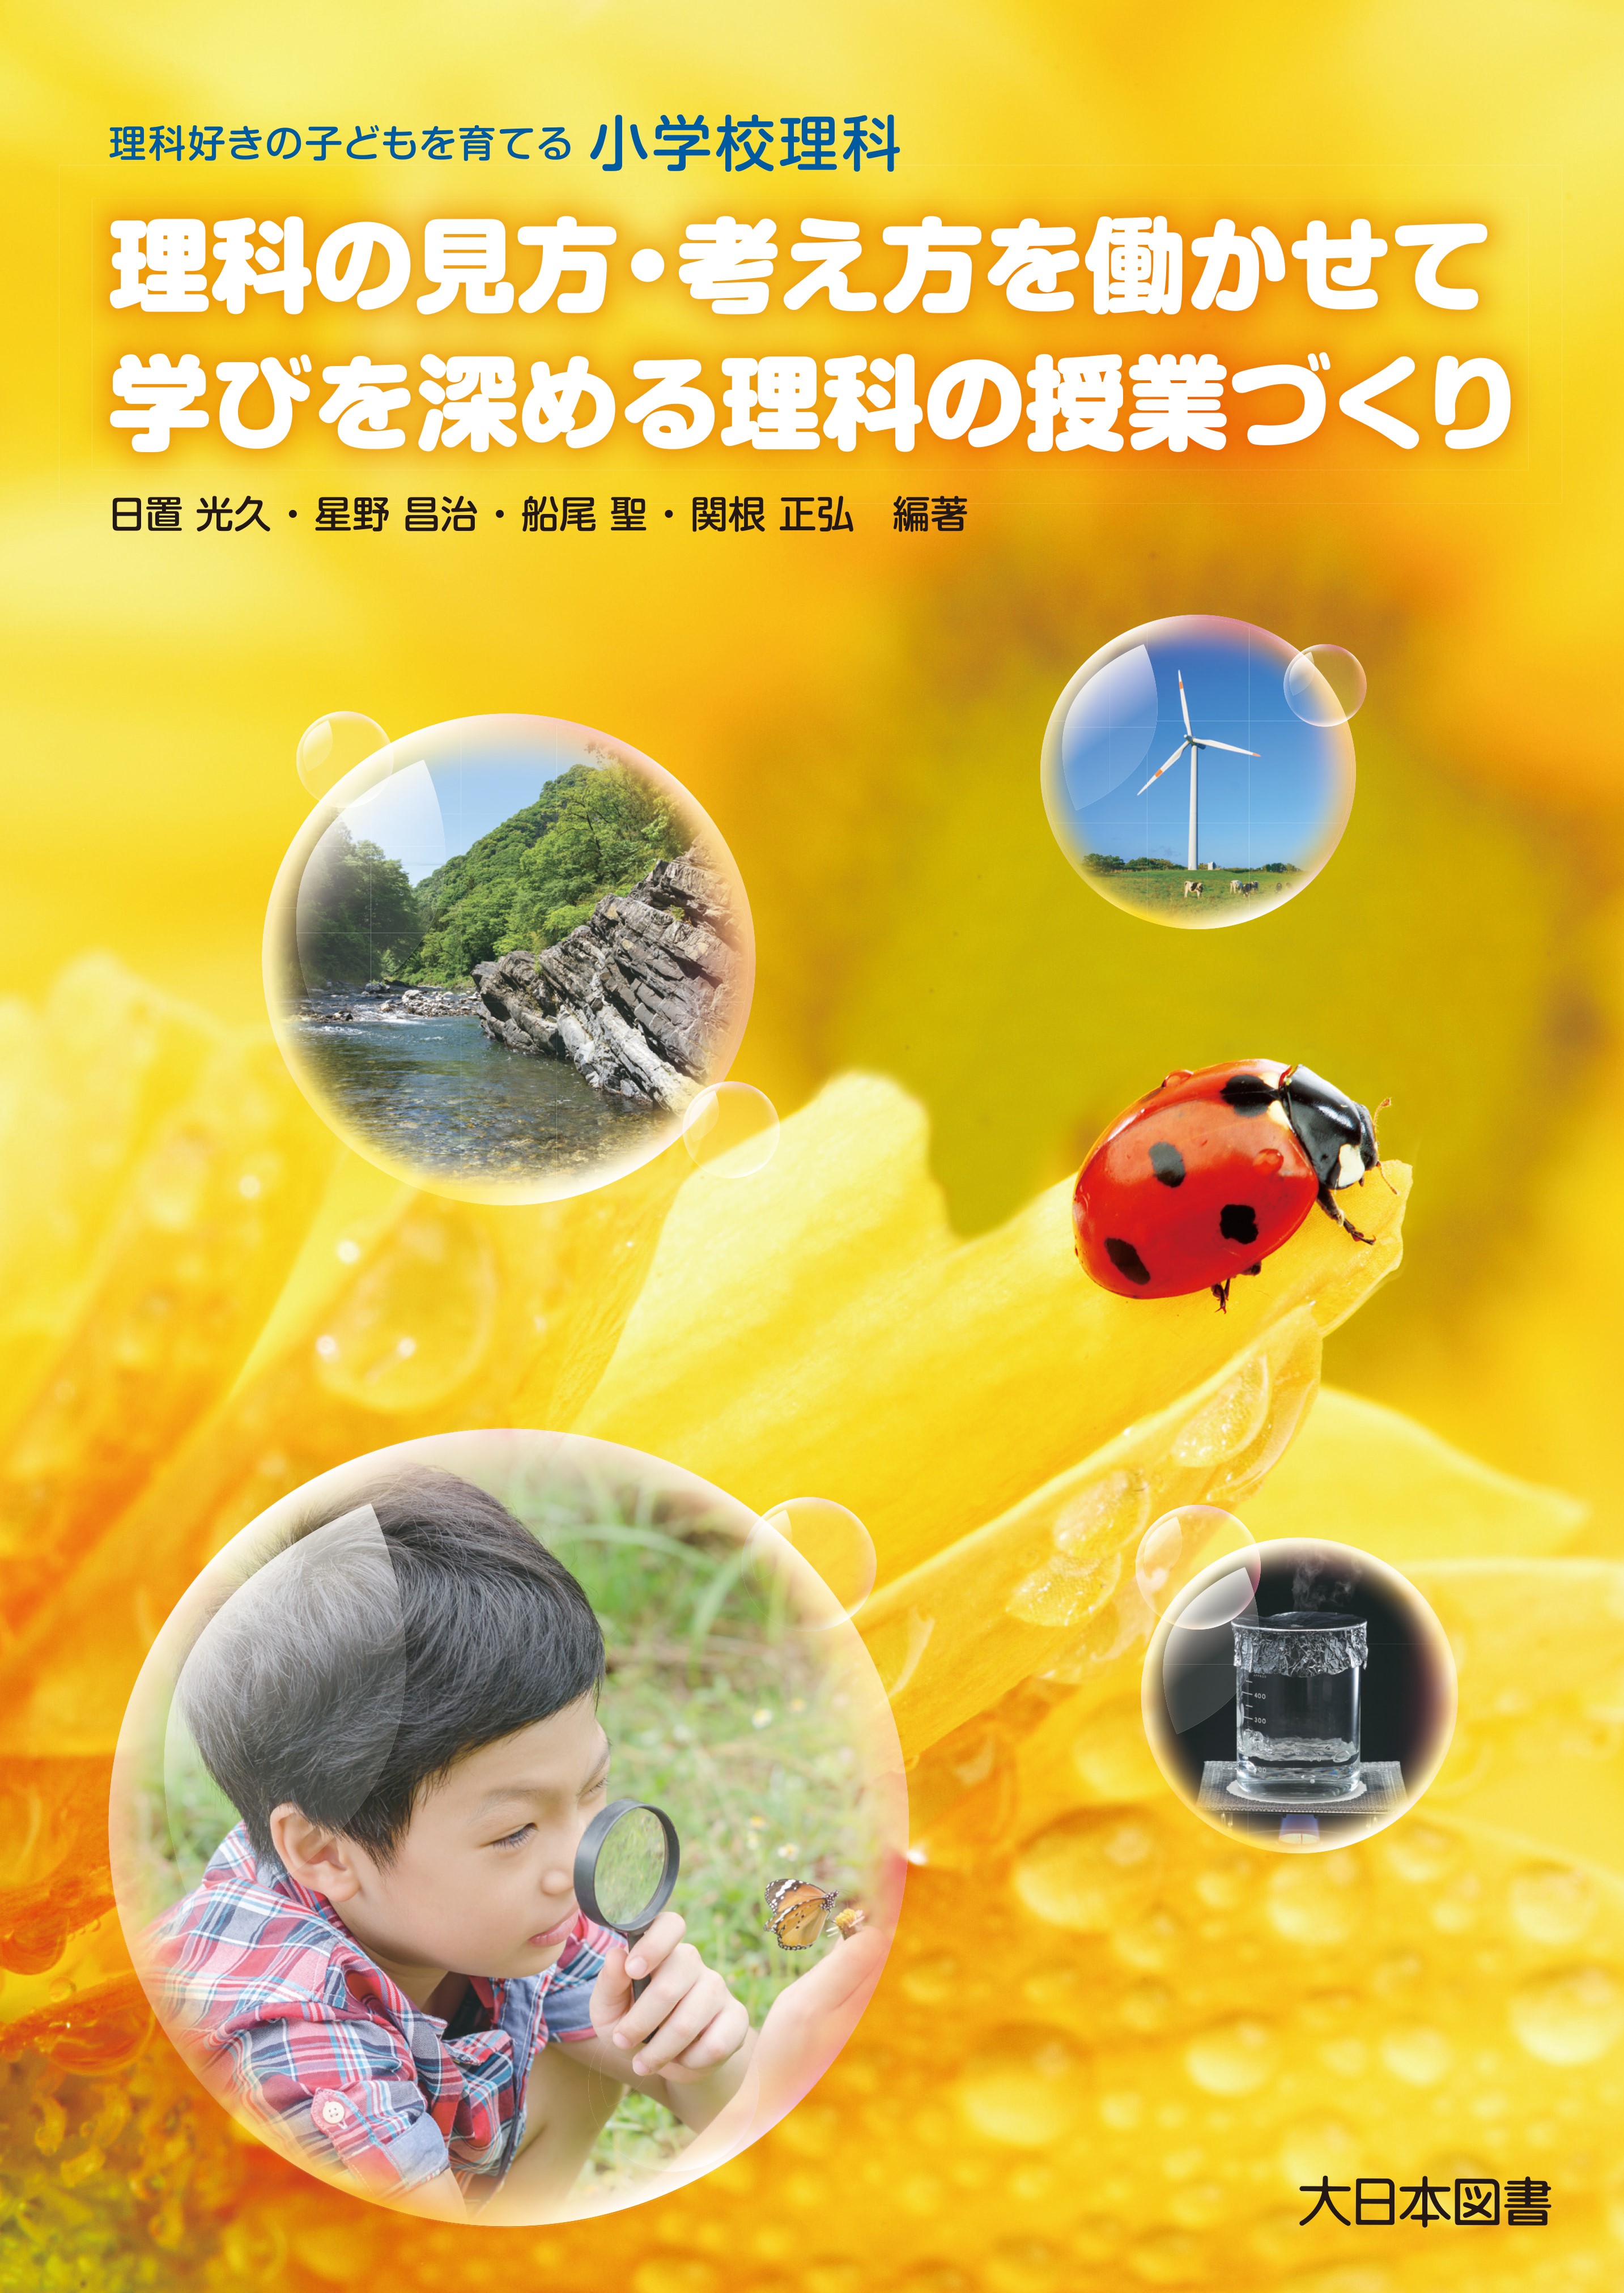 A picture of yellow flower, kid, ladybug etc.